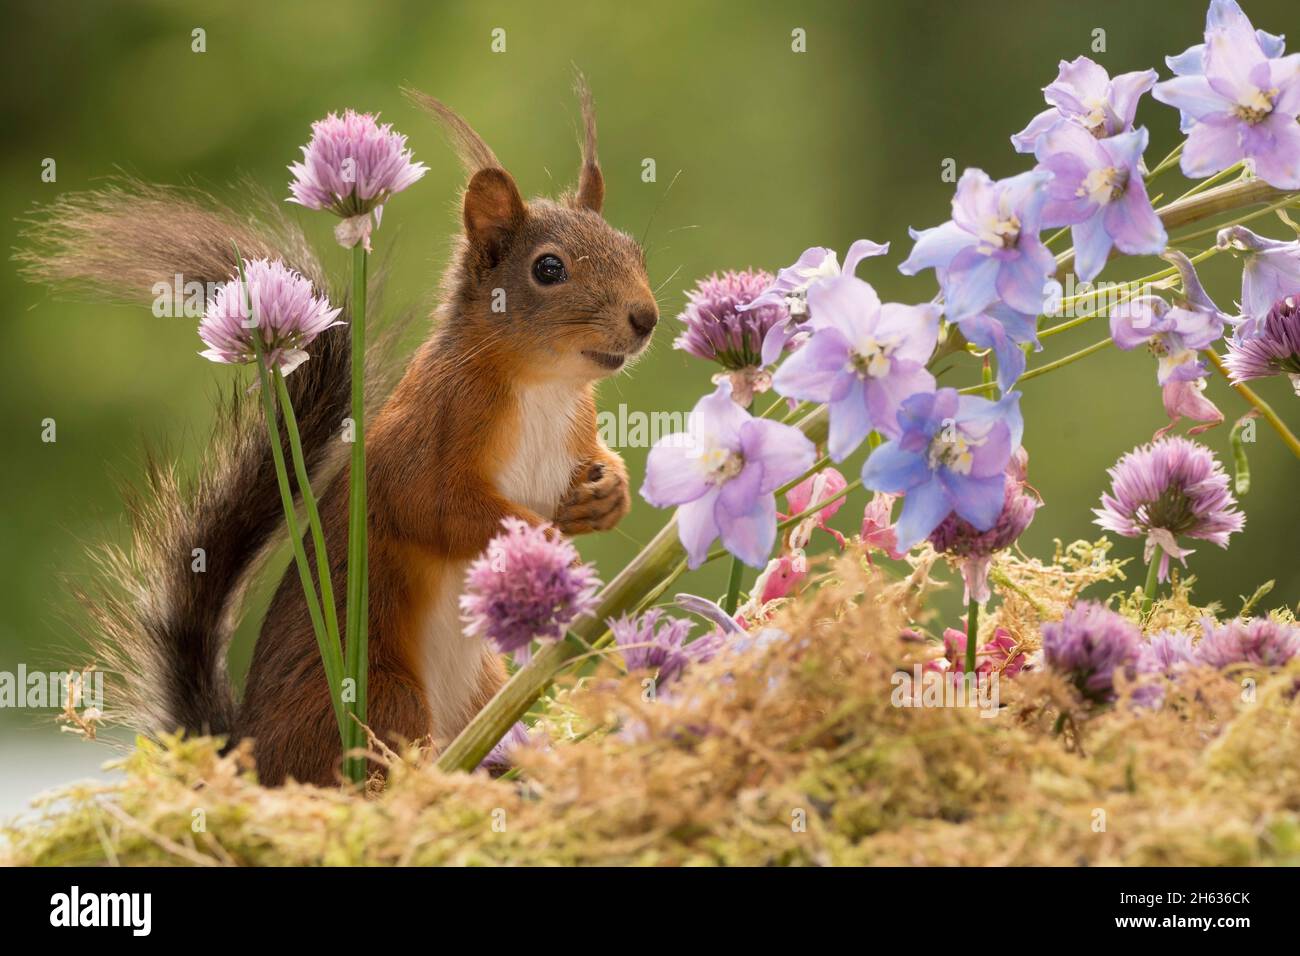 red squirrel standing with flowers in sunlight Stock Photo